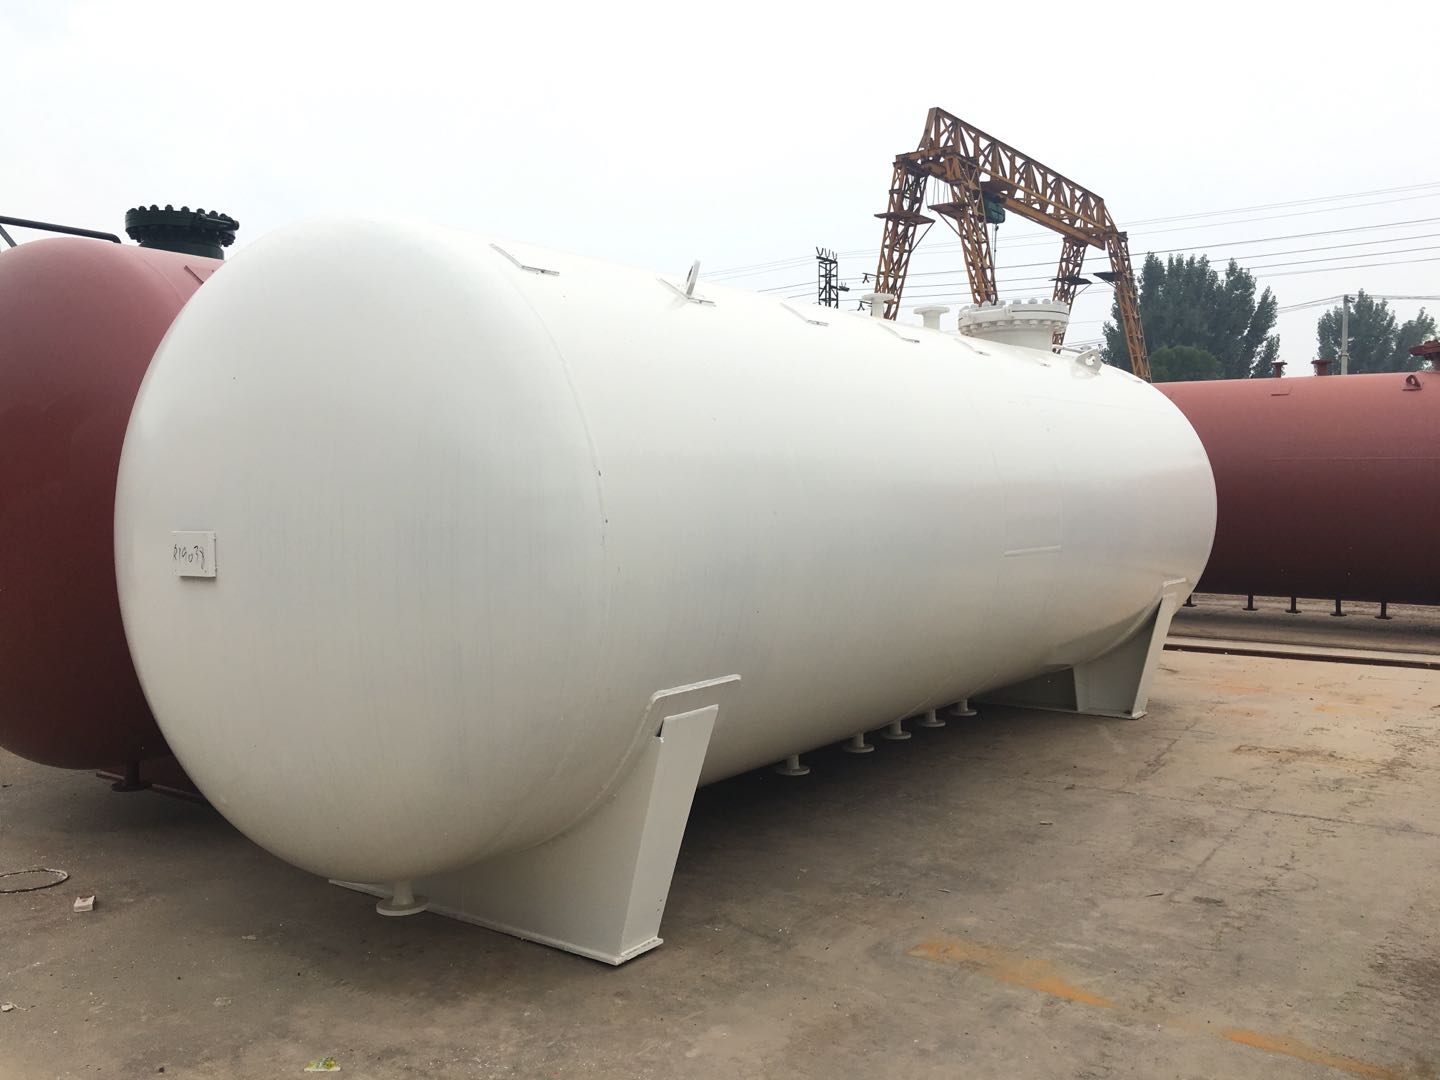 Comprehensive inspection of liquefied gas storage tanks